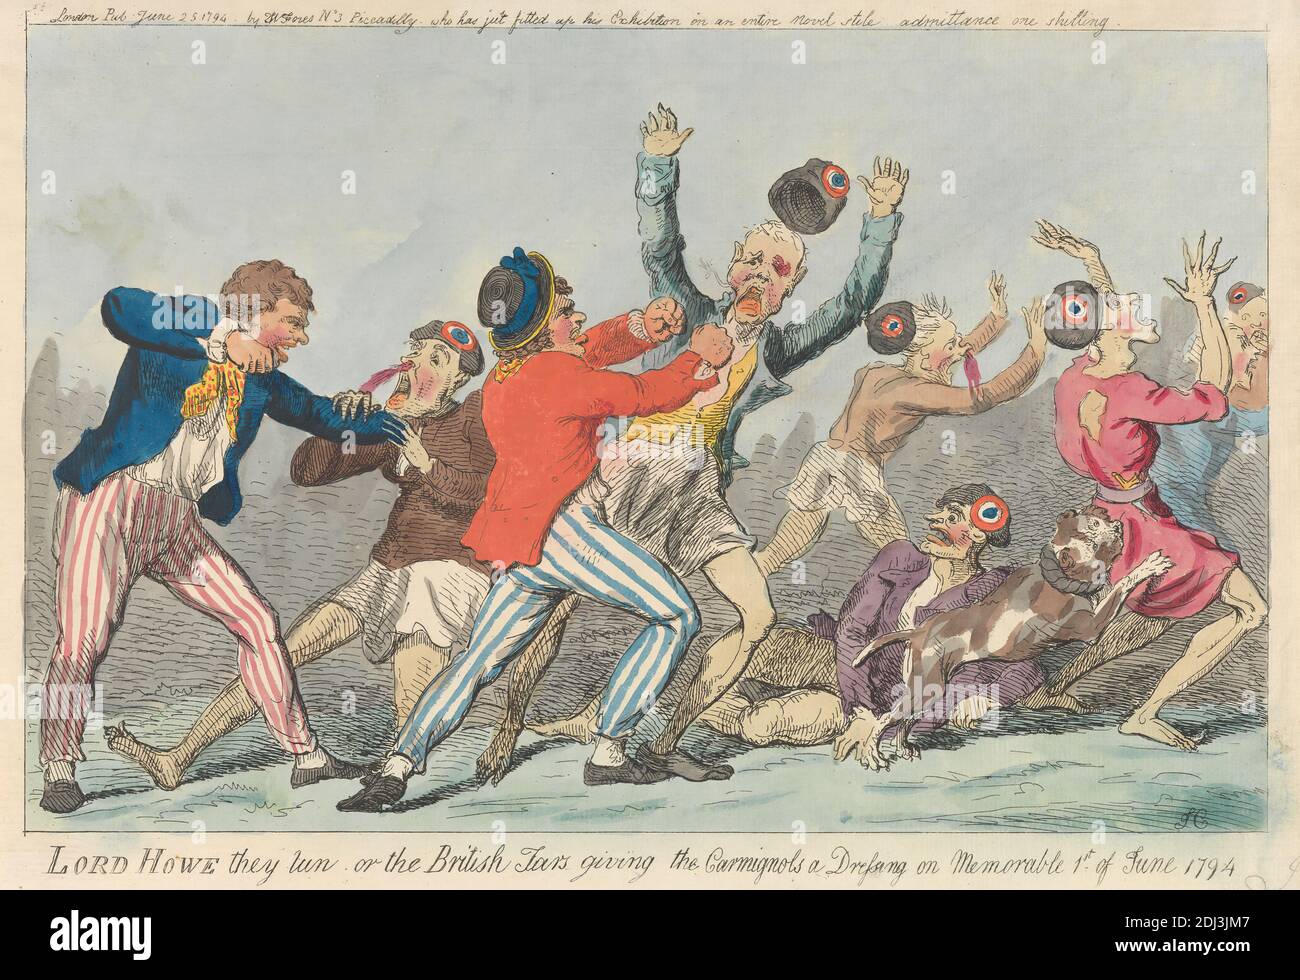 Lord Howe they run, or the British Tars giving the Carmignols a Dressing on Memorable 1st of June 1794, Isaac Cruikshank, 1756–1810, British, 1794, Etching, hand-colored, Sheet: 8 3/8 x 12 7/8in. (21.3 x 32.7cm Stock Photo